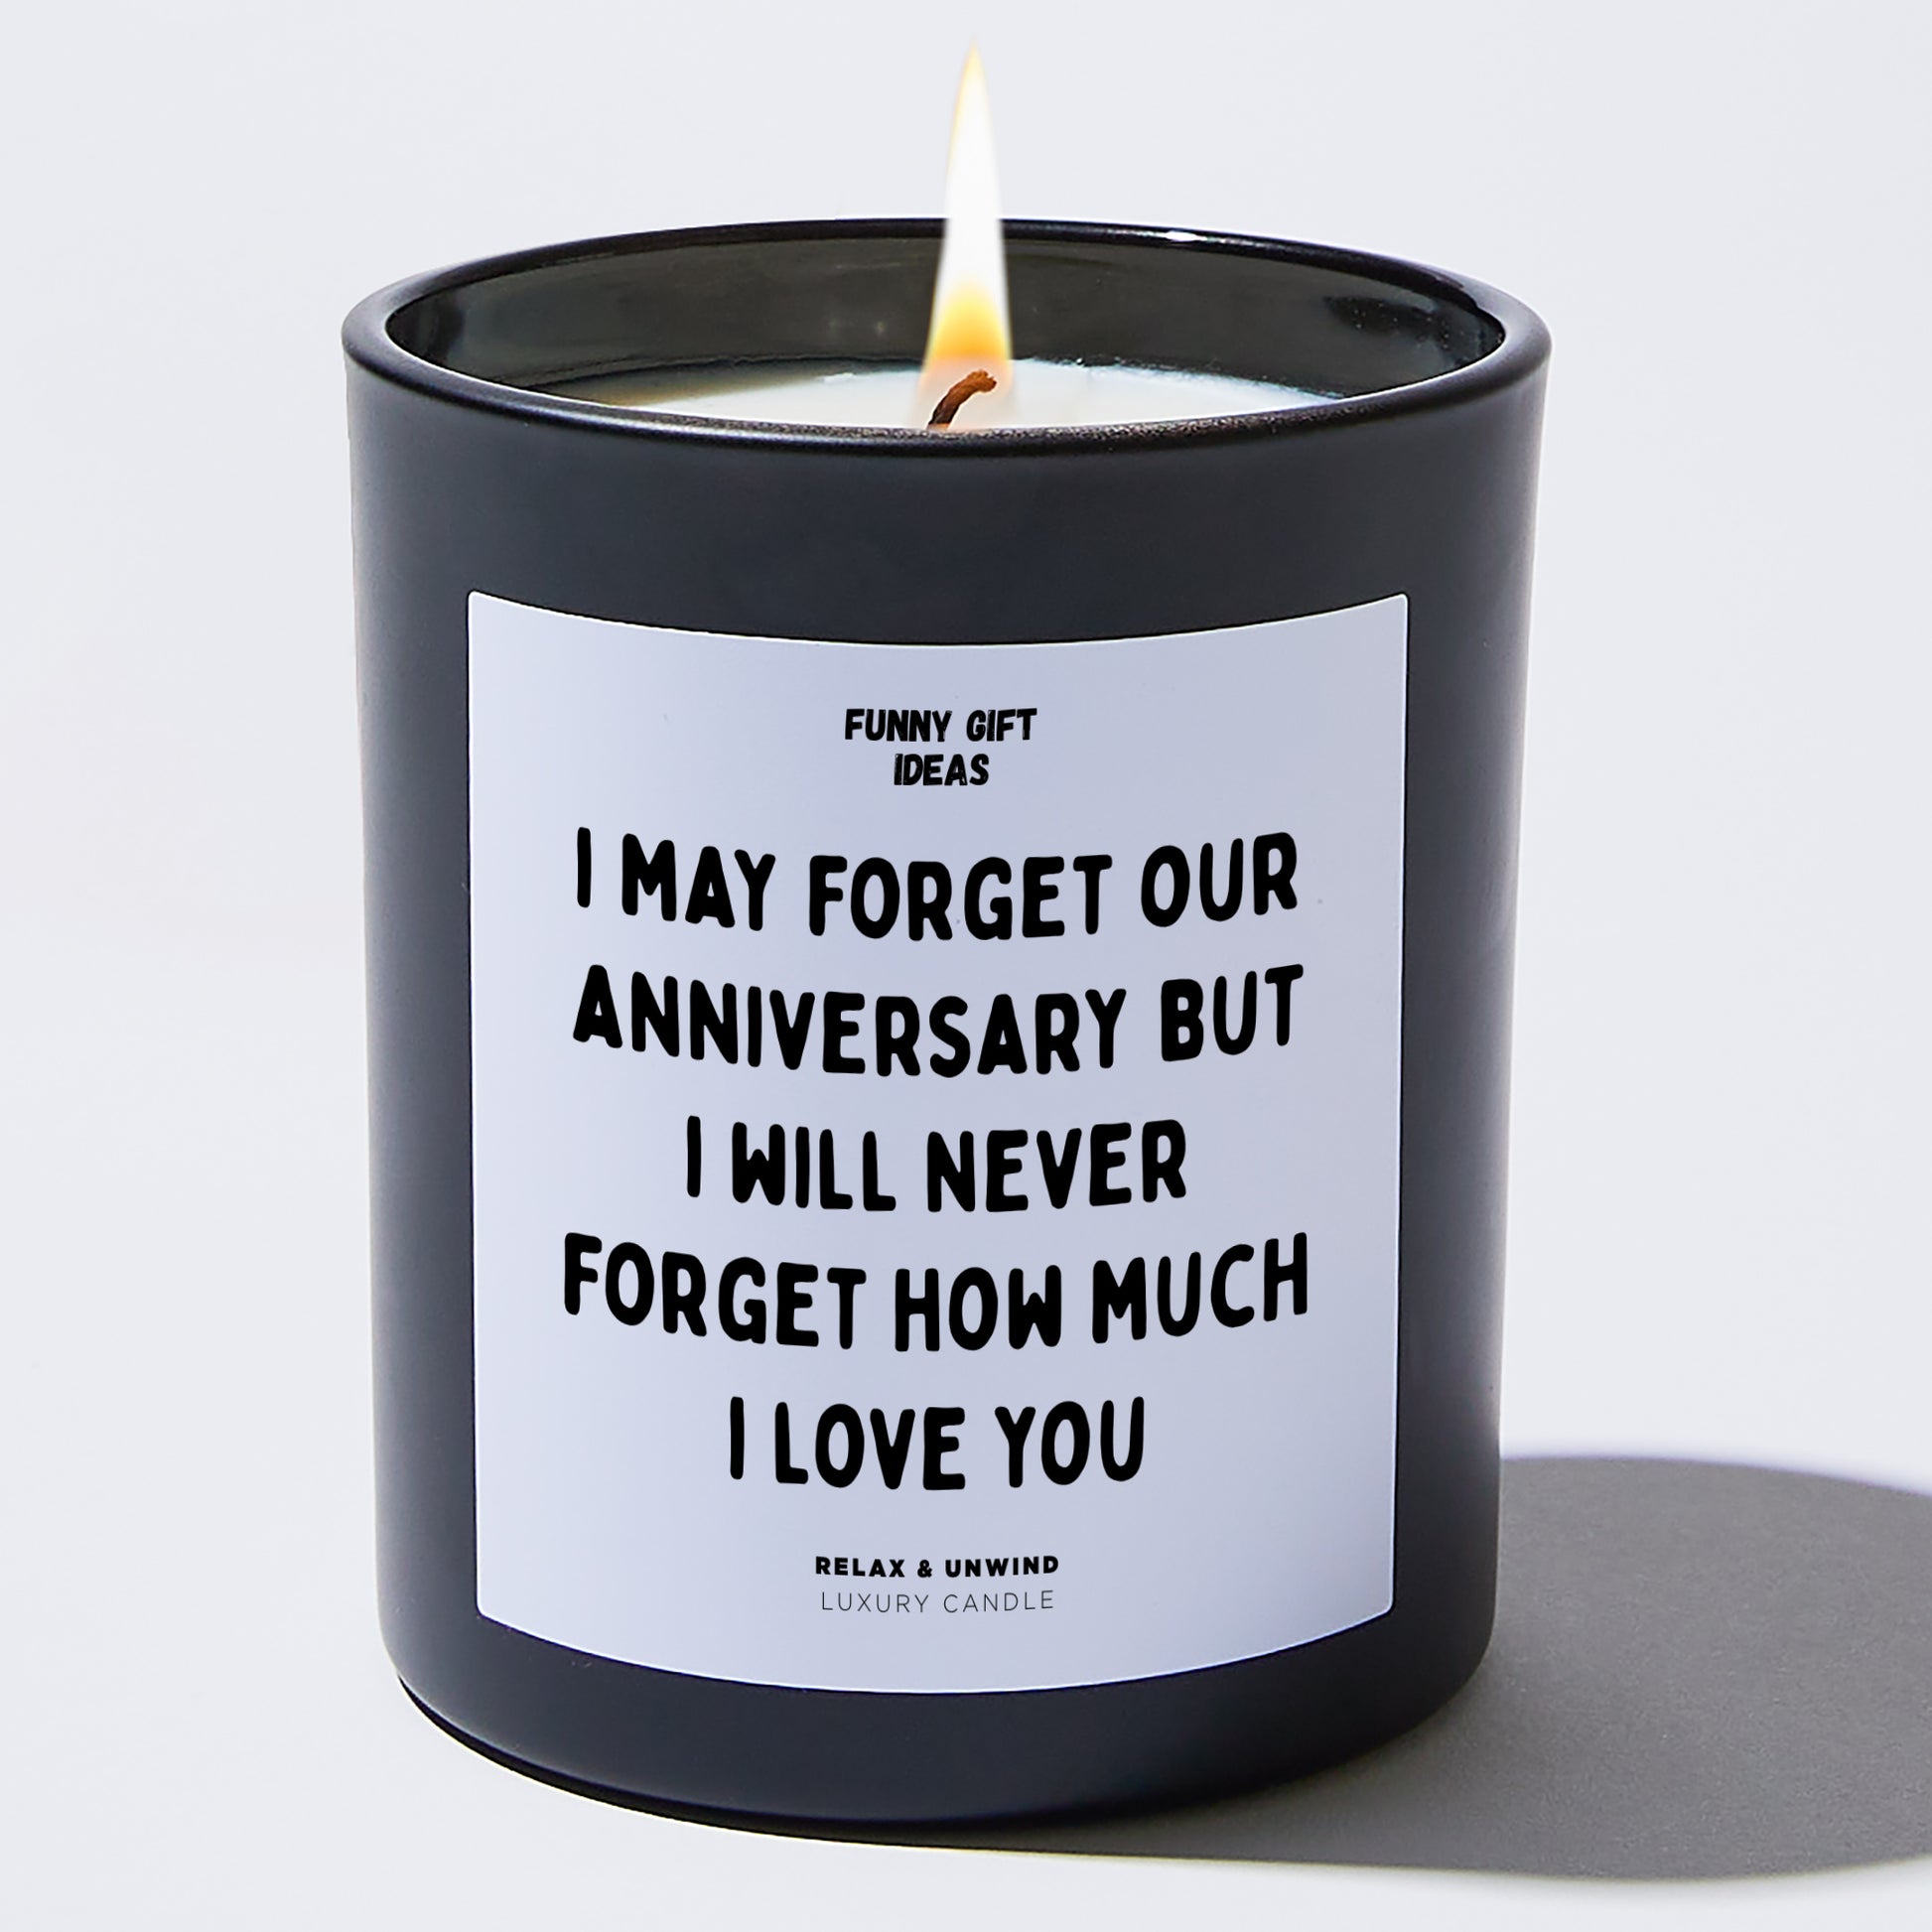 Anniversary I May Forget Our Anniversary but I Will Never Forget How Much I Love You - Funny Gift Ideas